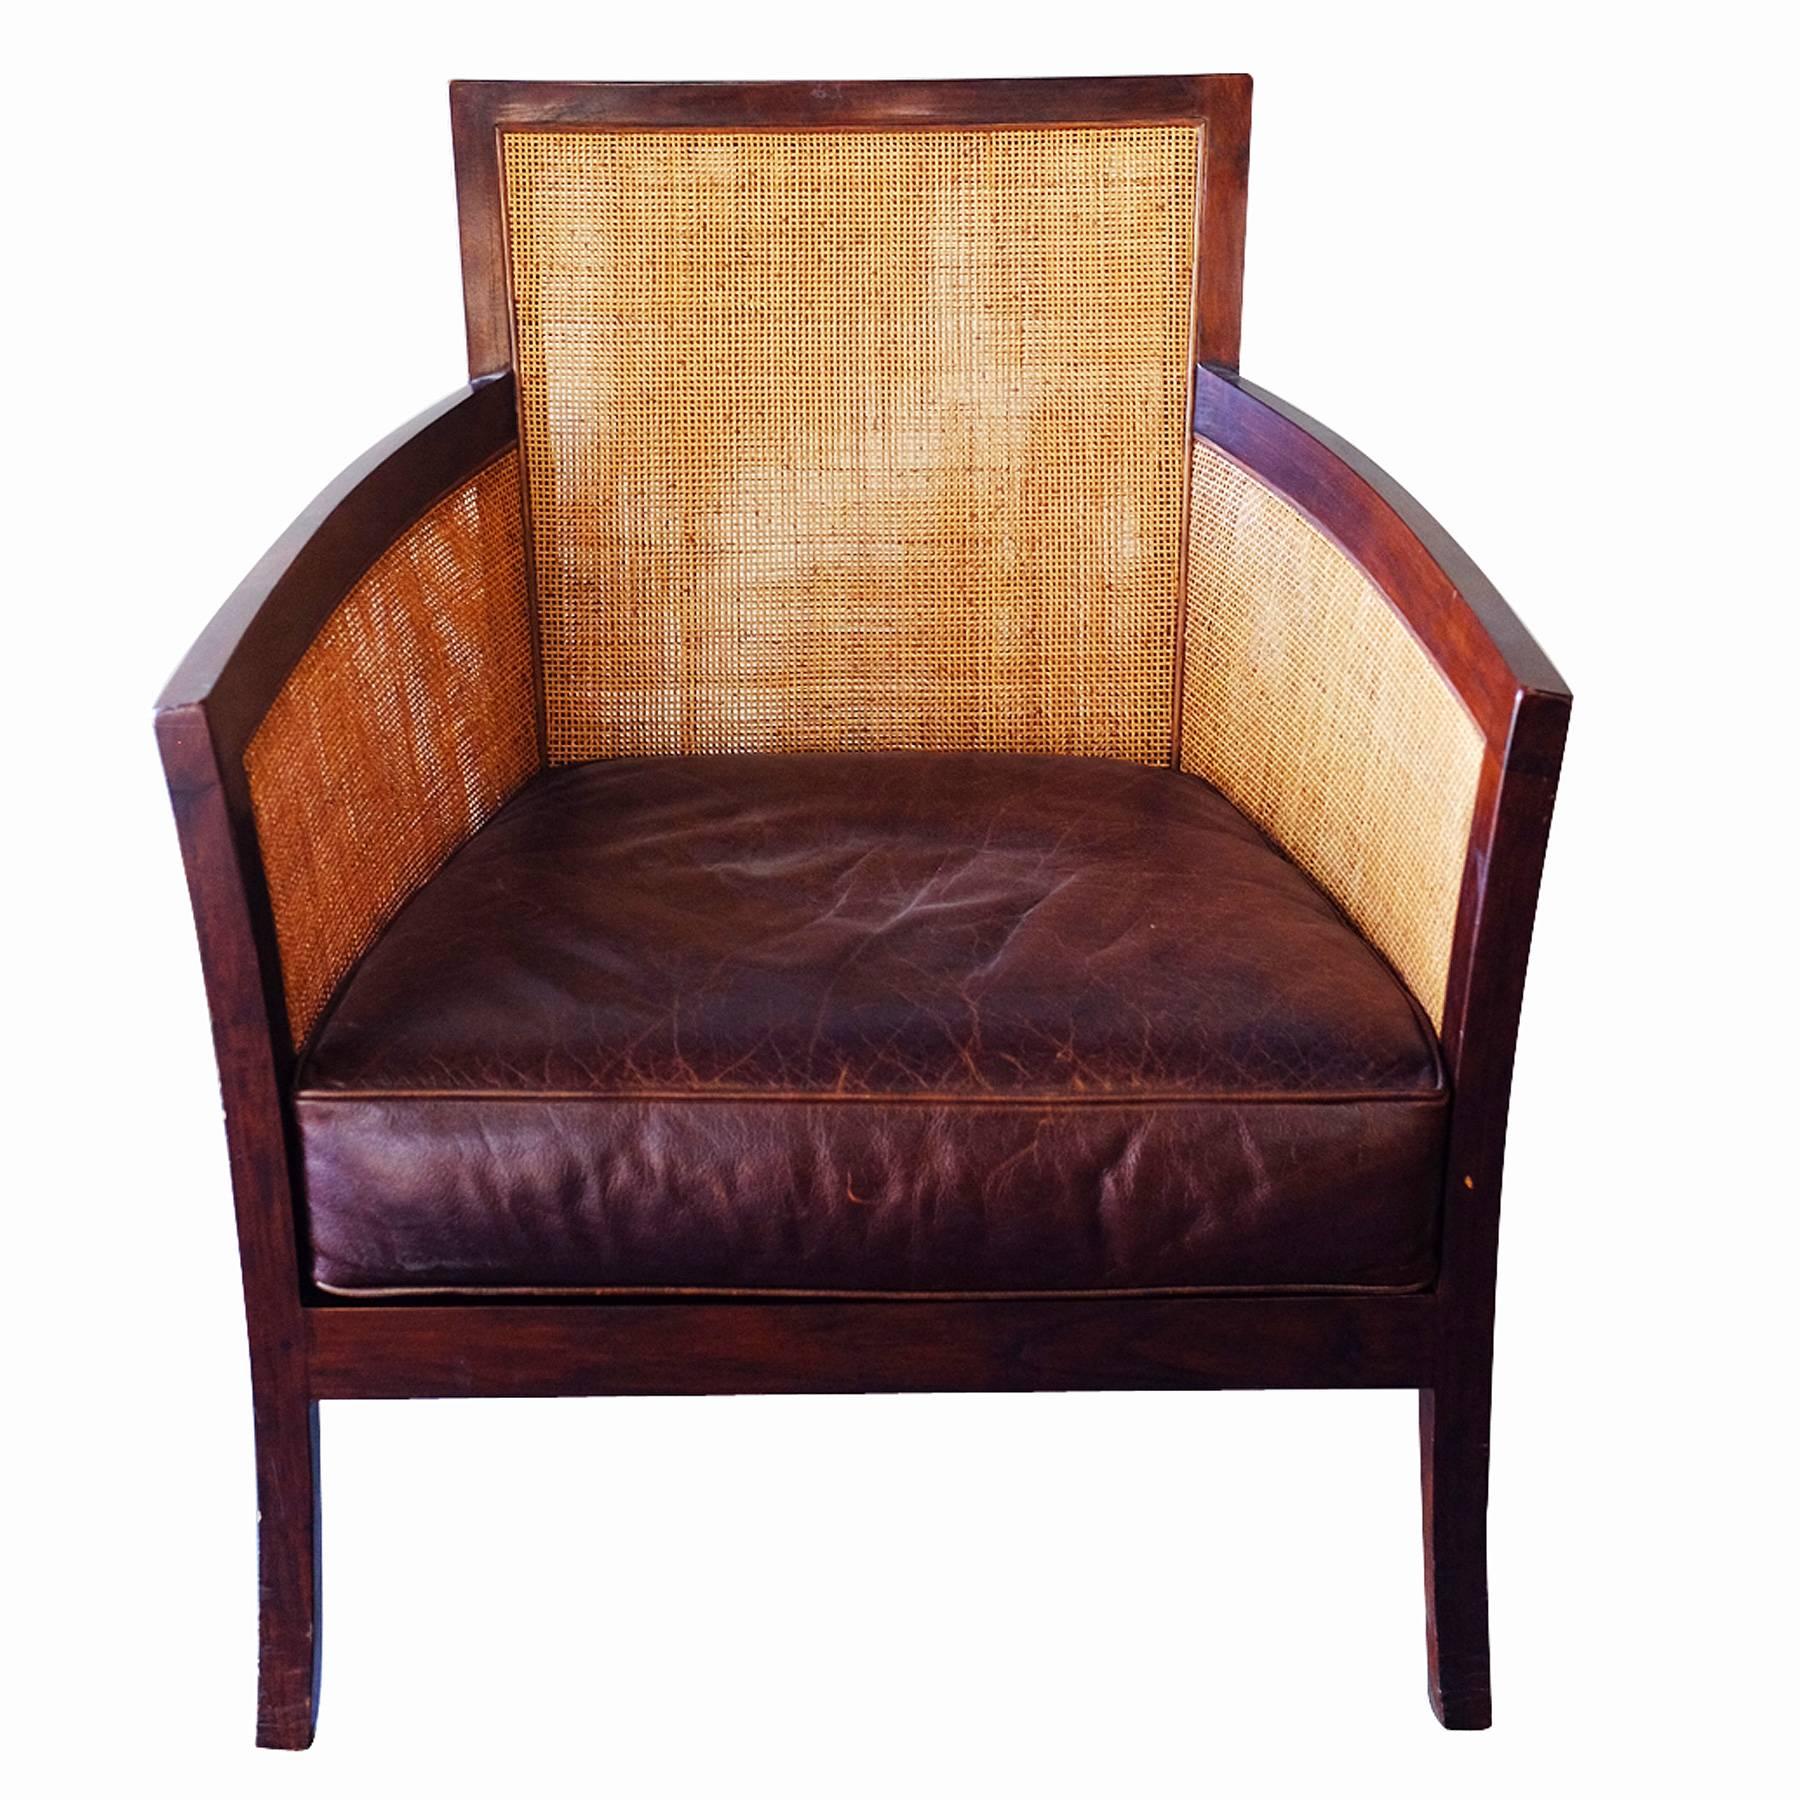 American Contemporary Dark Stained Wicker Lounge Chair